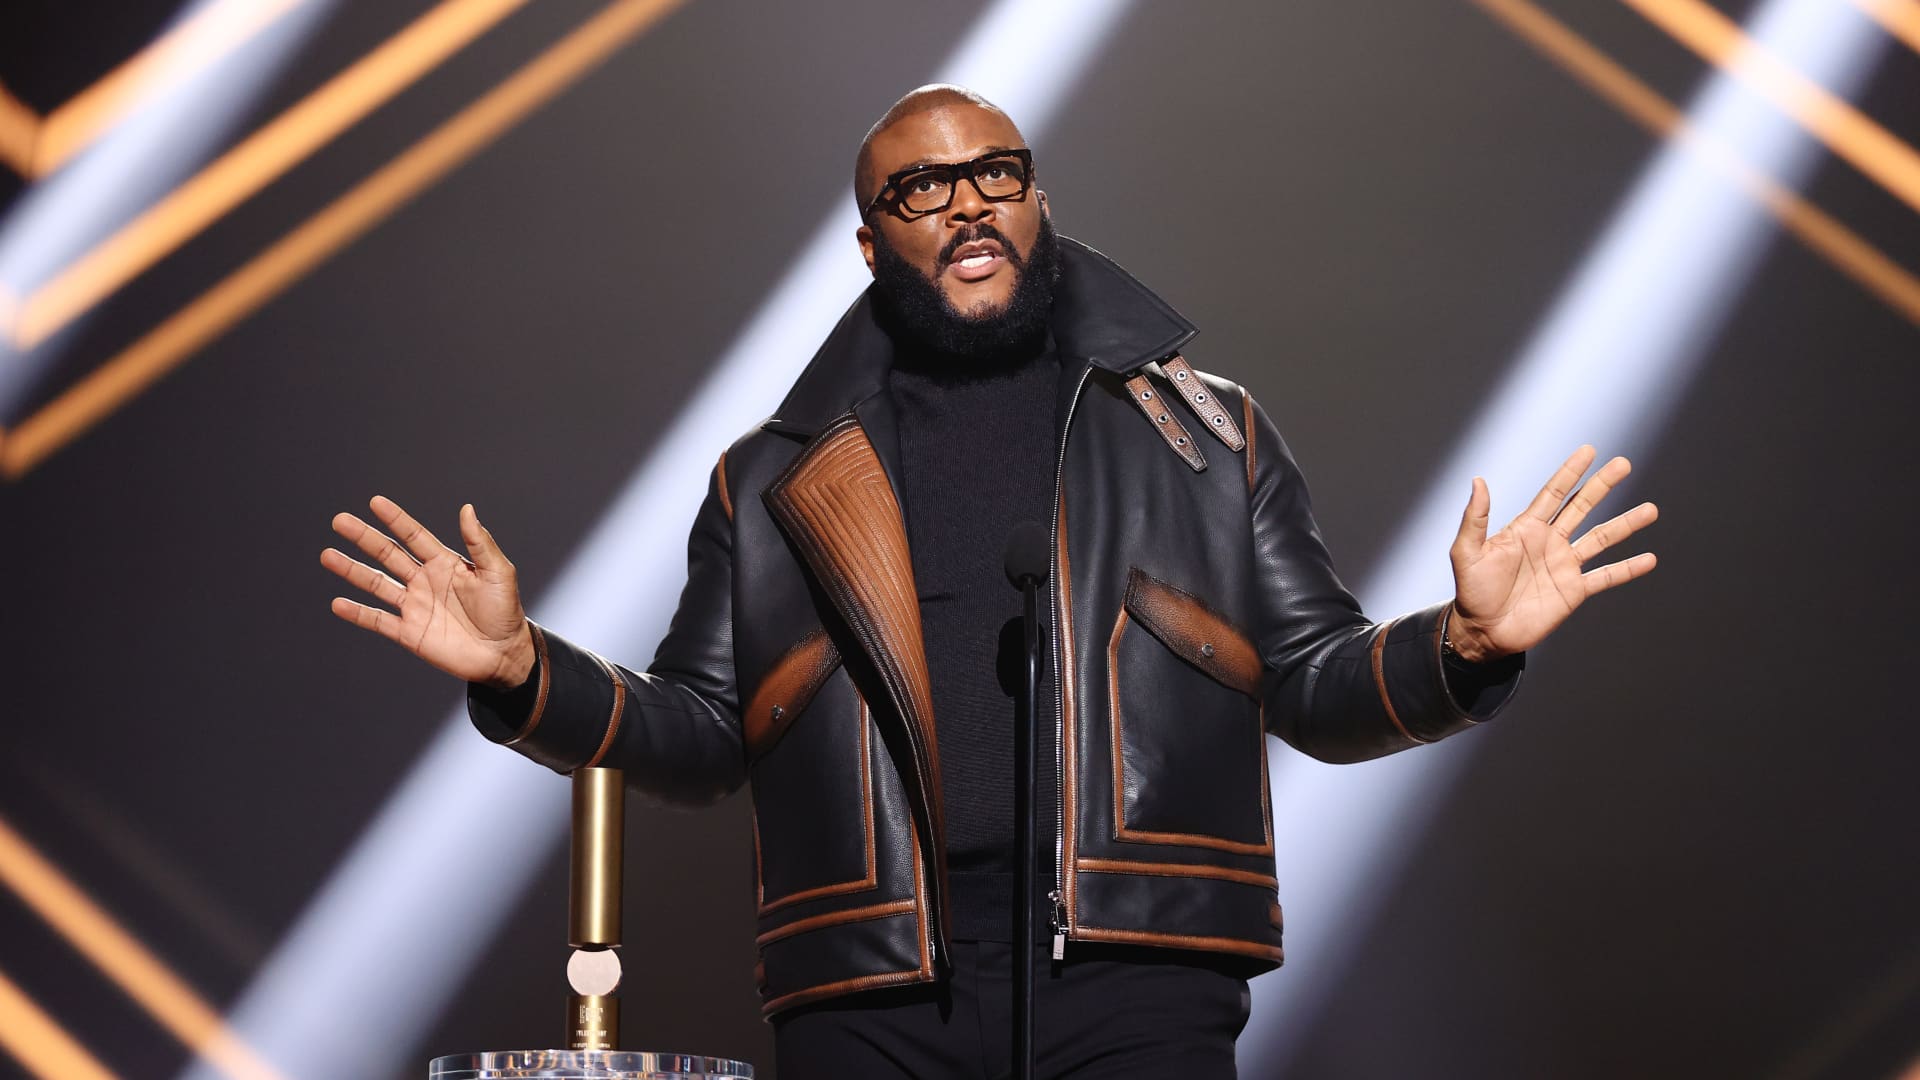 Tyler Perry accepts People's Champion Award onstage for the 2020 E! People's Choice Awards held at the Barker Hangar in Santa Monica, California and on broadcast on Sunday, November 15, 2020.